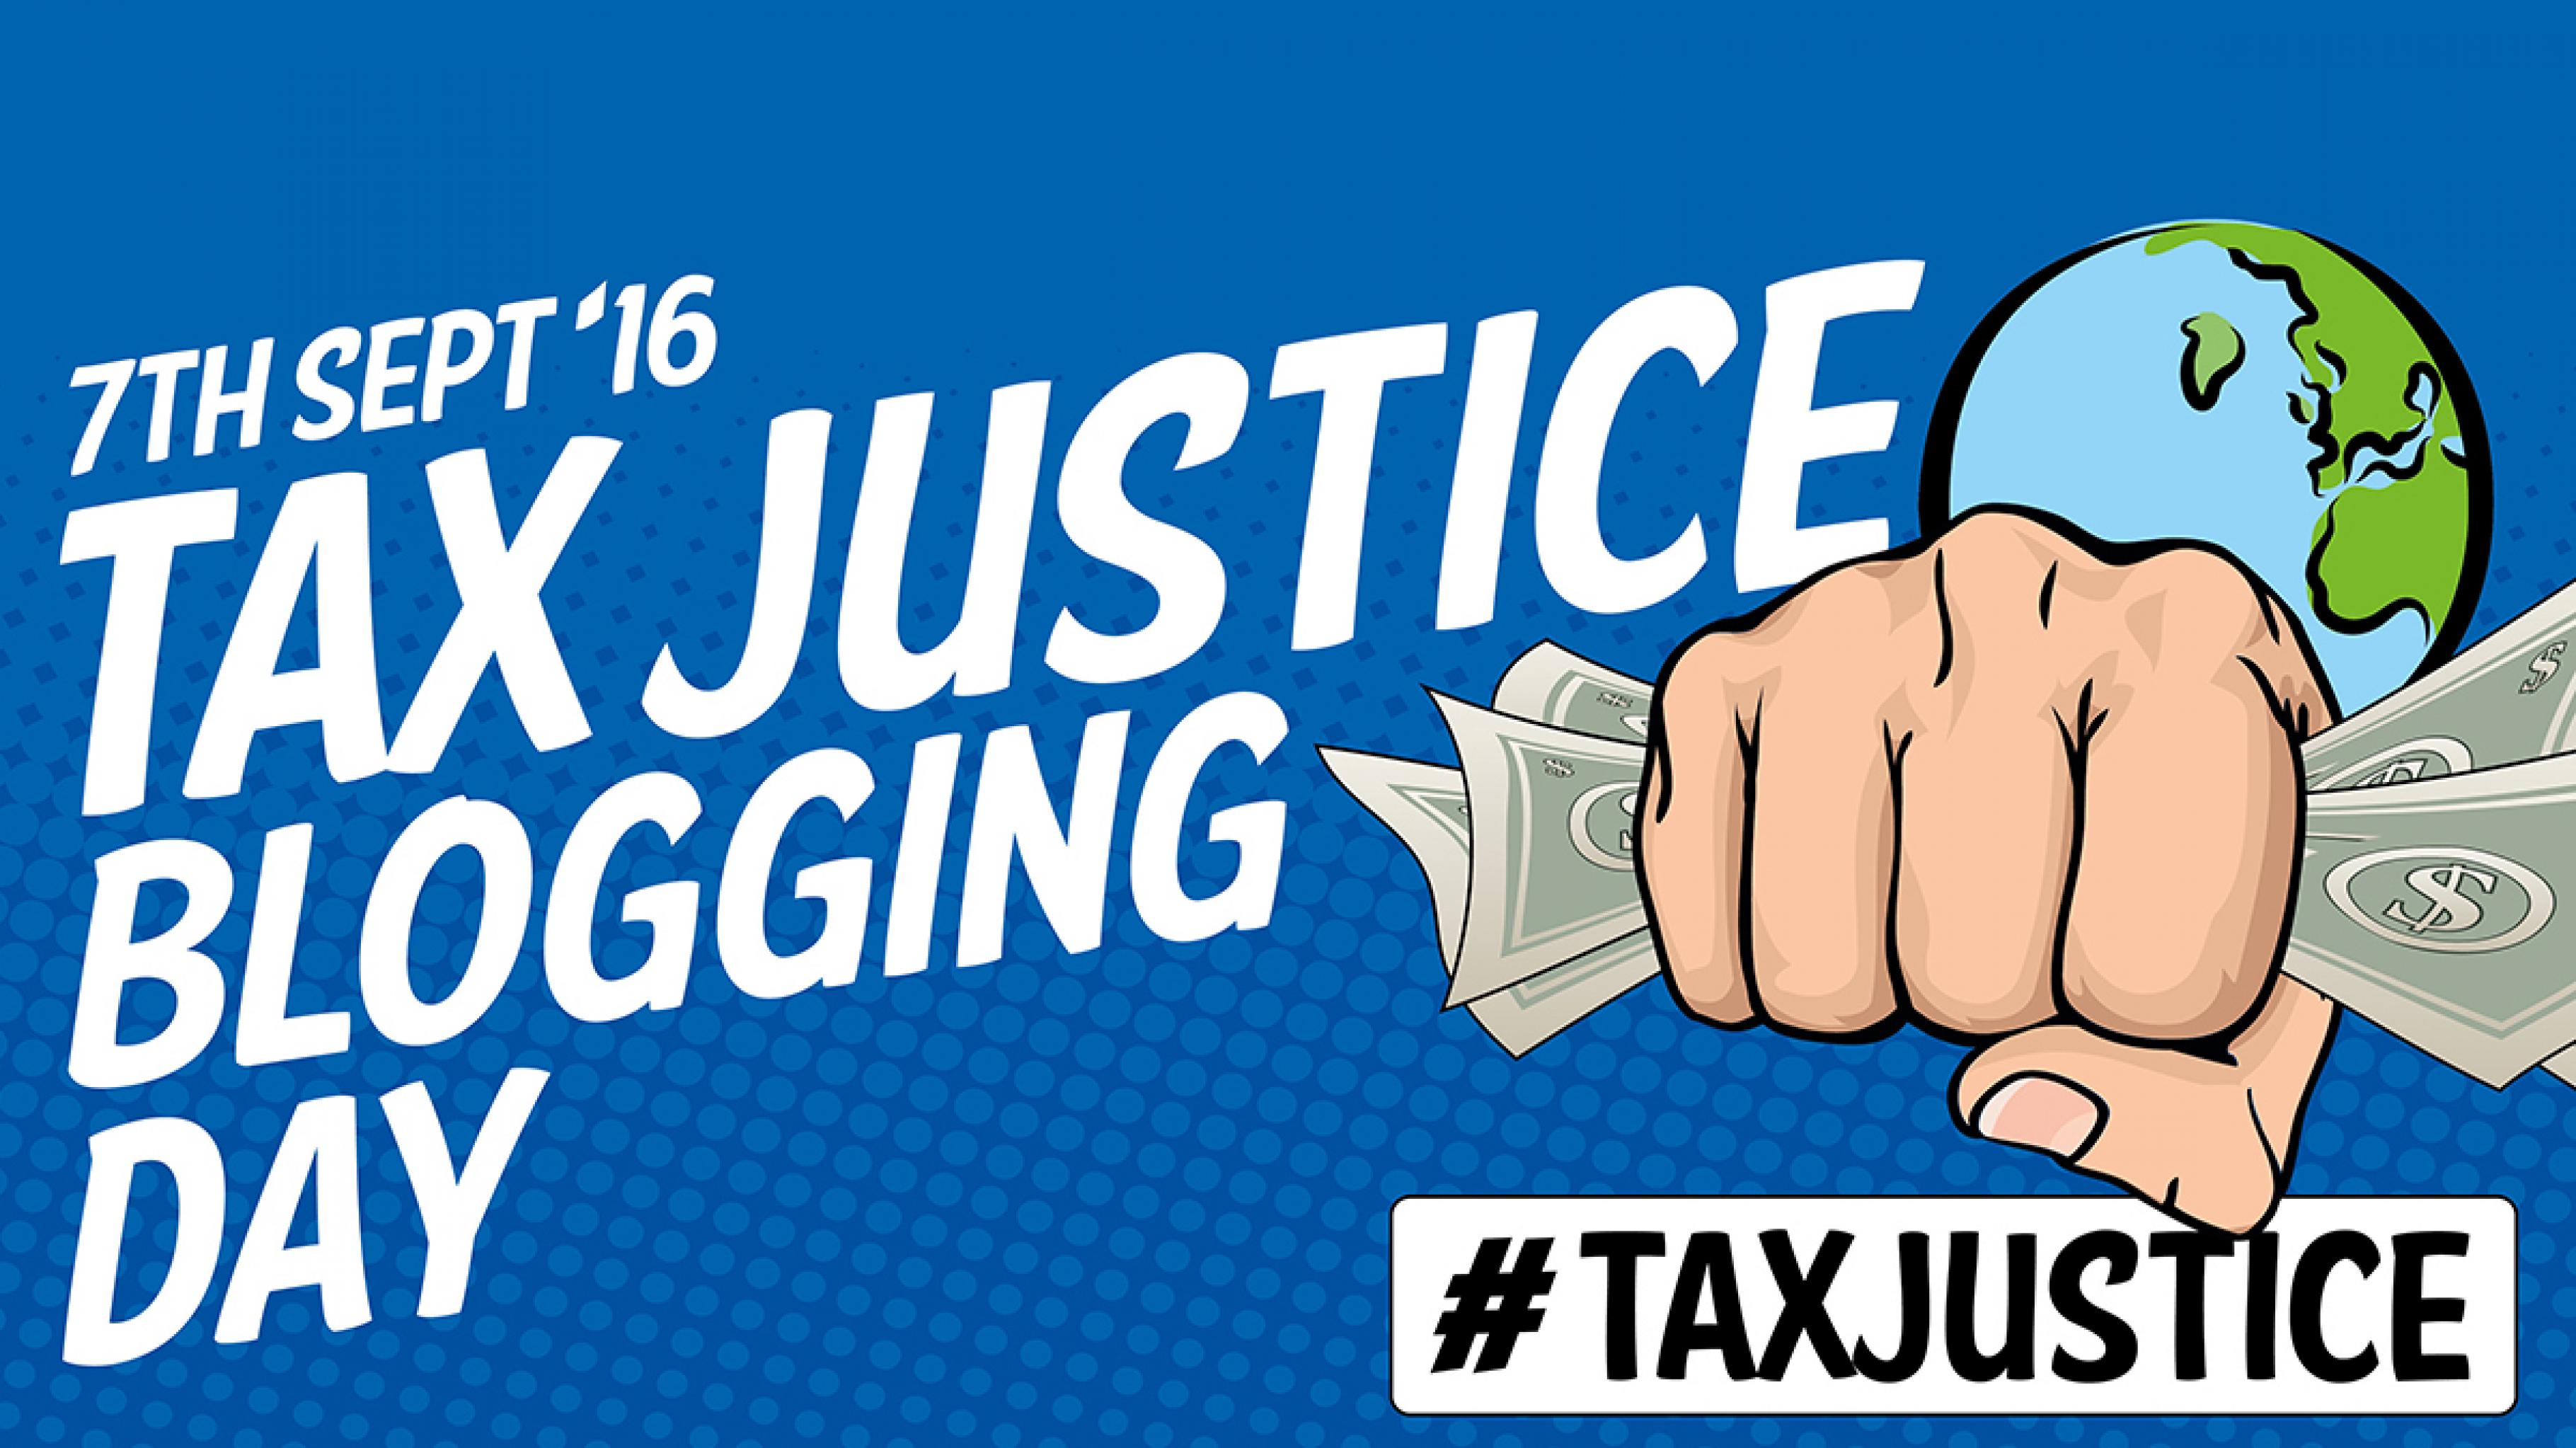 Tax Justice Blogging Day